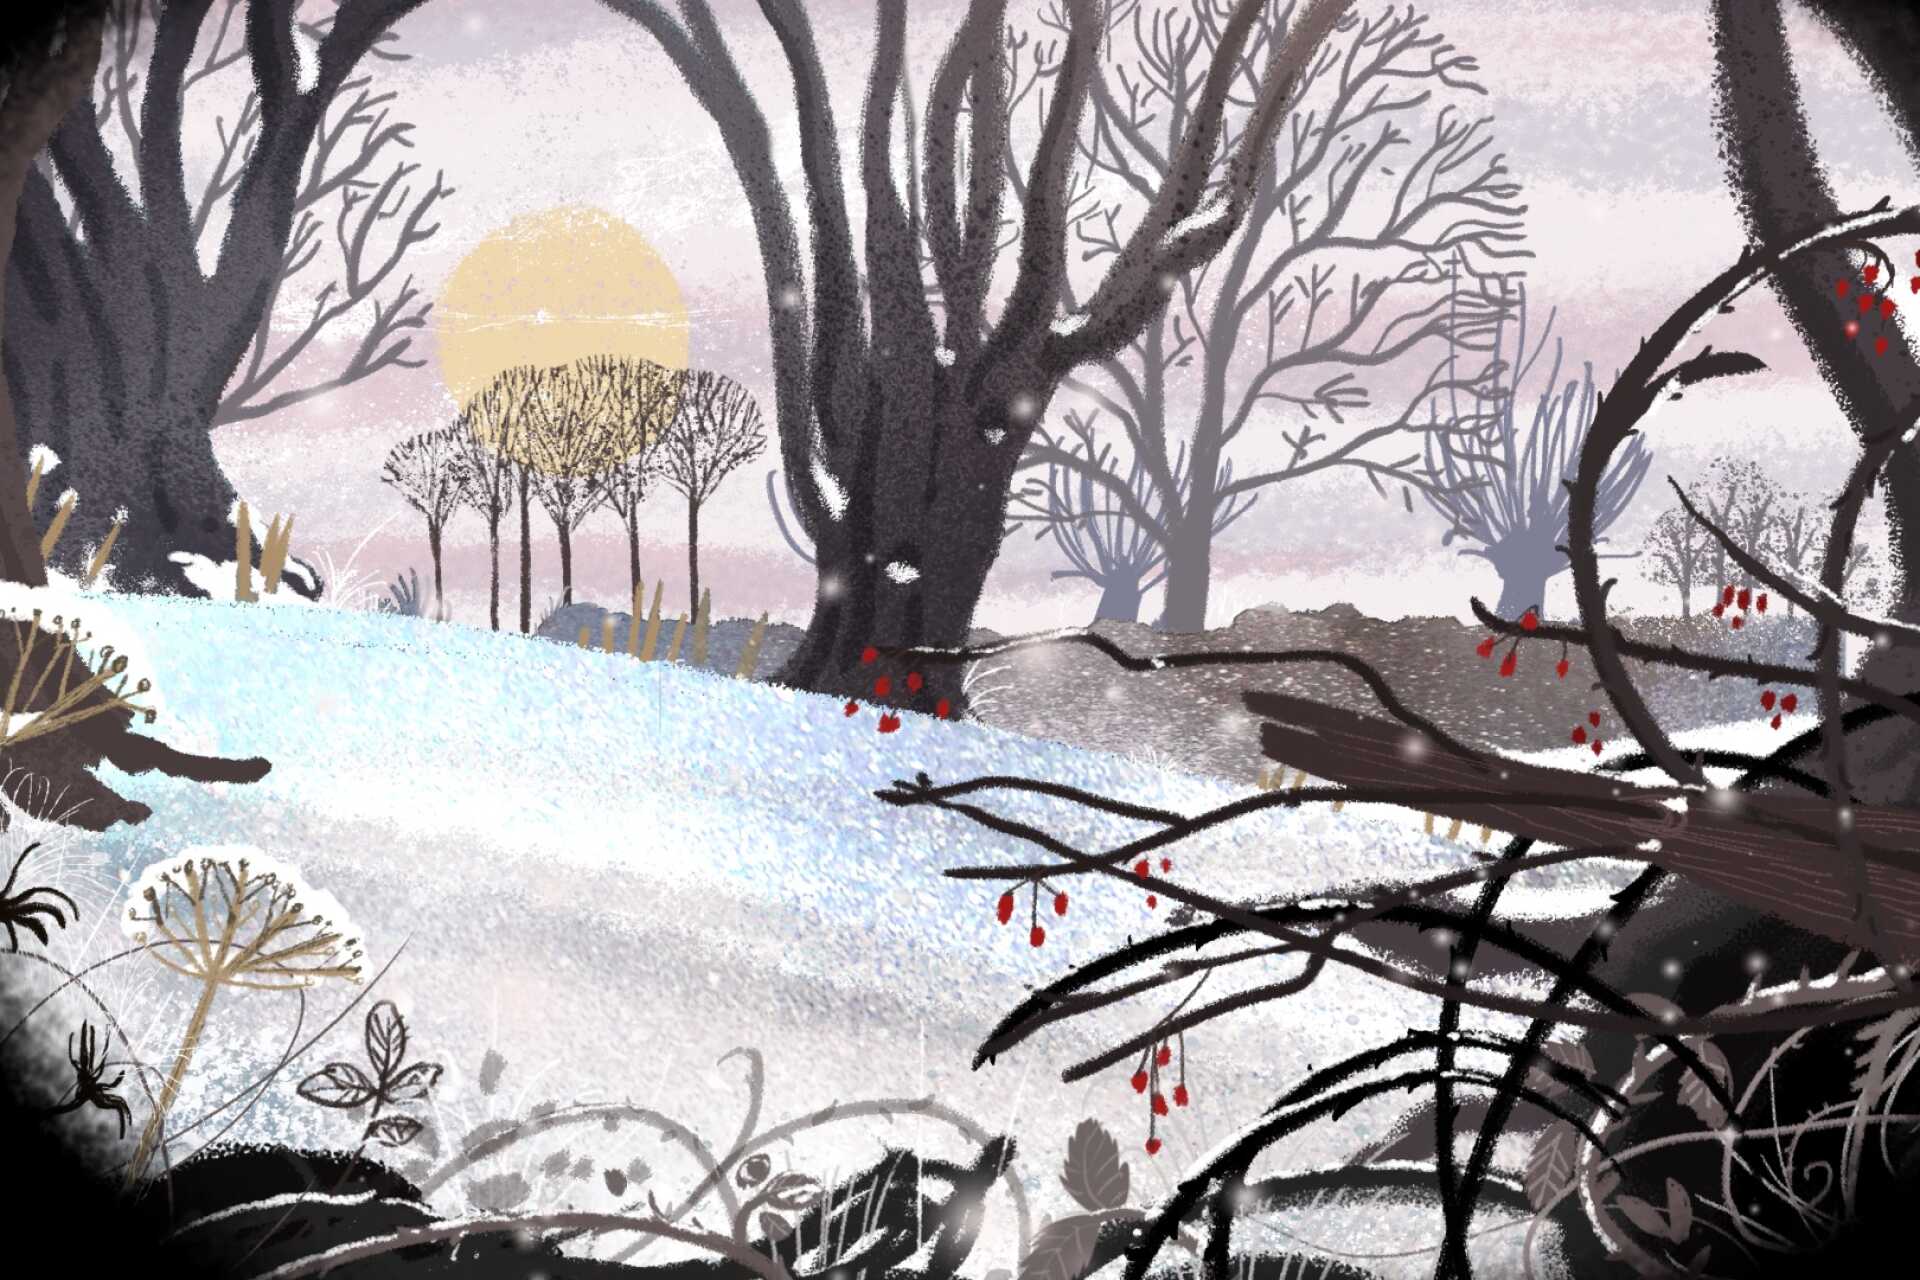 Wintry woodland graphic, snow and bare branches